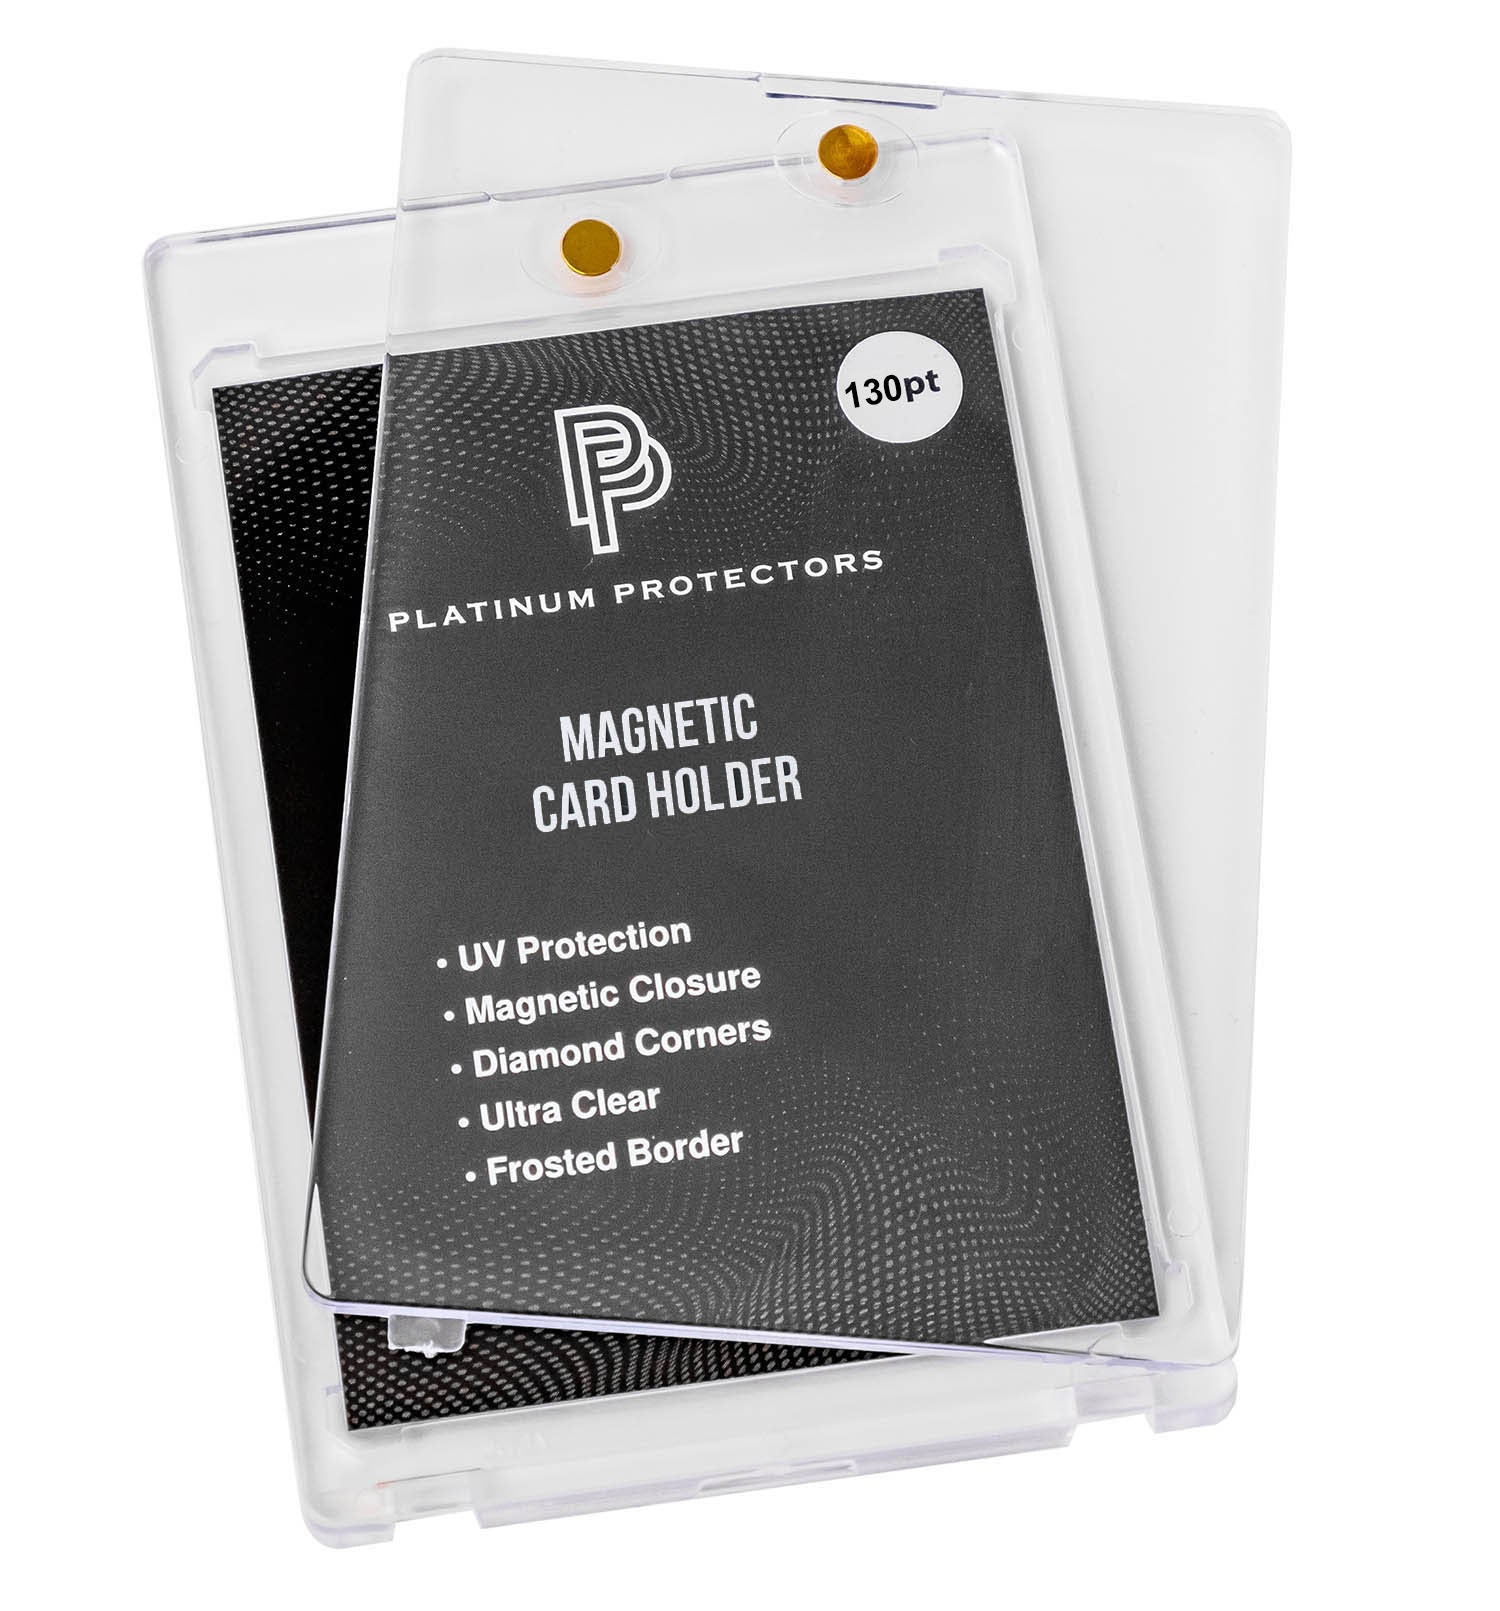 Platinum Protectors Magnetic Card Holders for Trading Cards - 130 pt